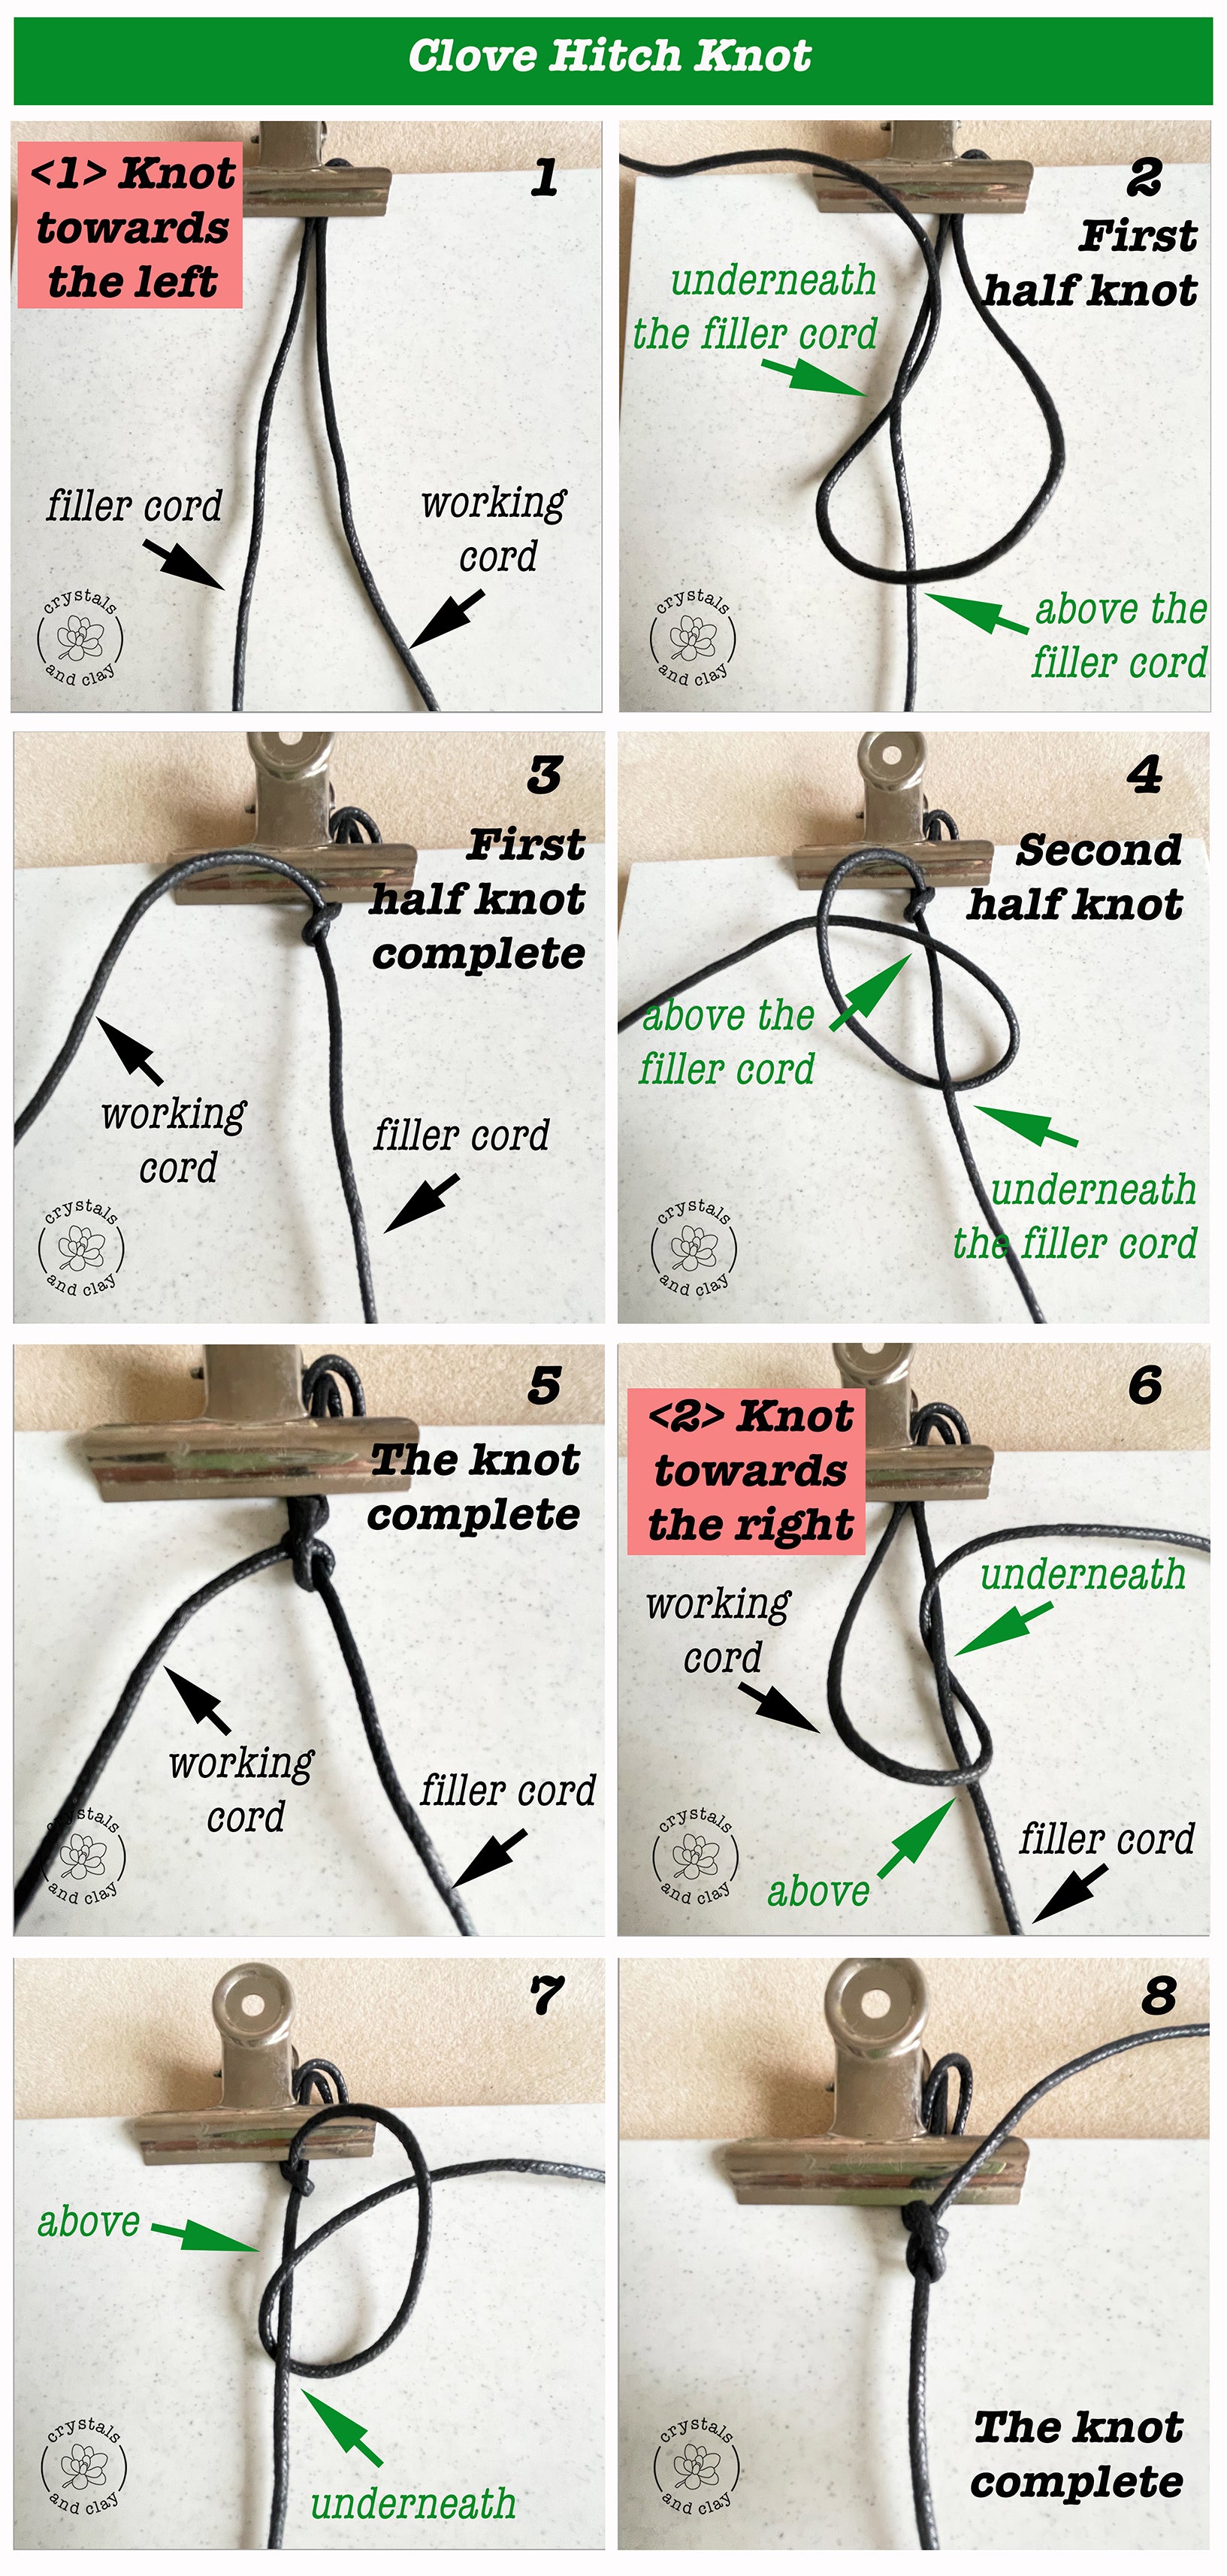 How To Tie A Double Half Hitch Knot -